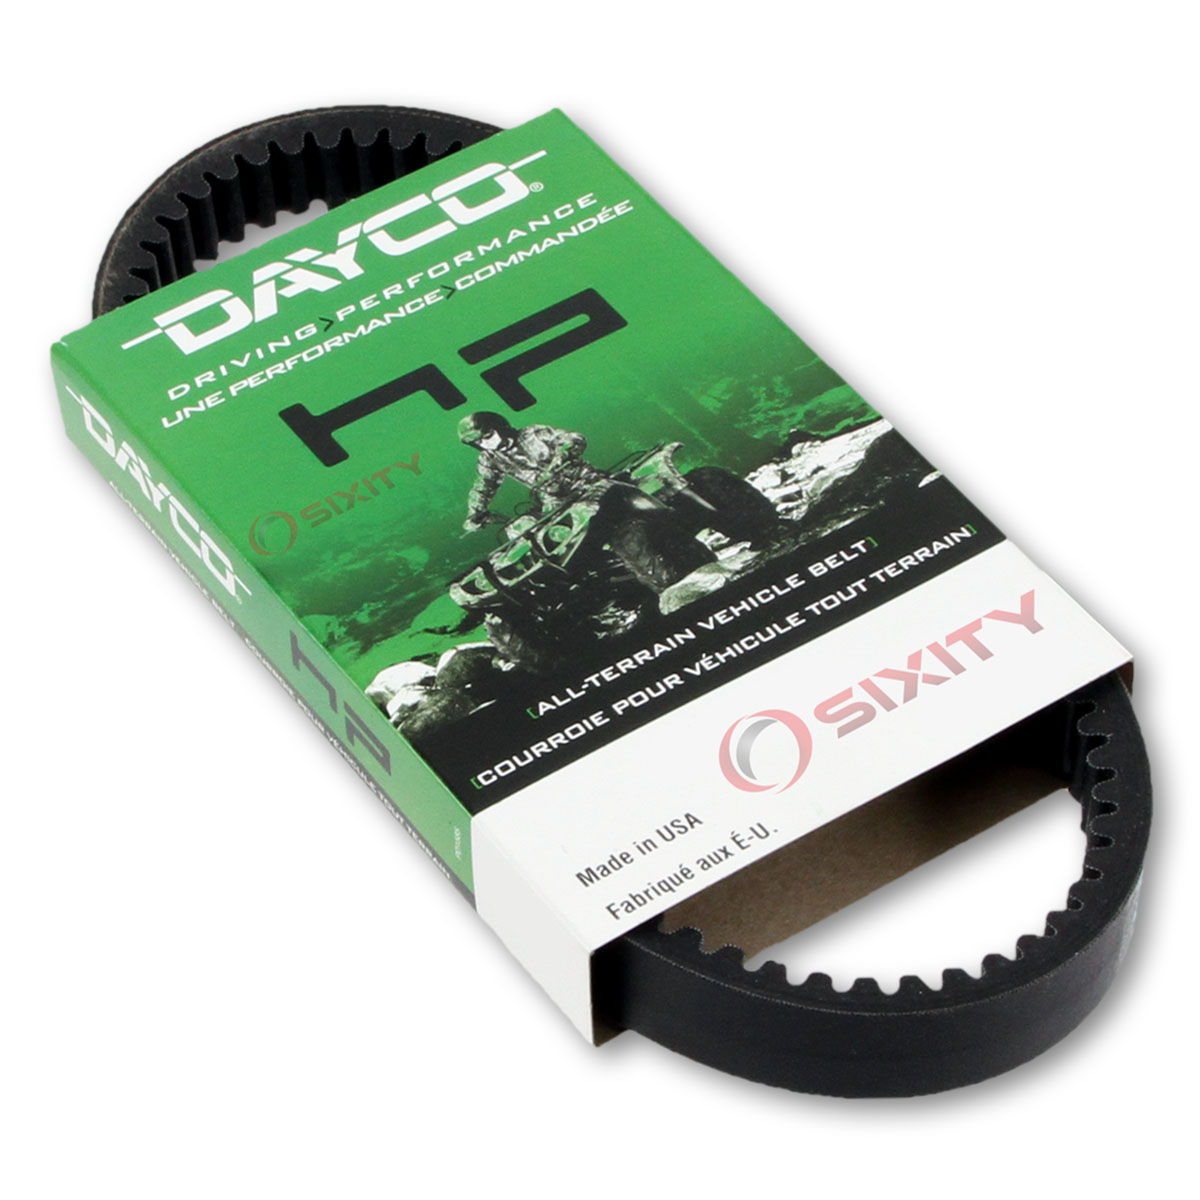 Dayco HP Drive Belt for 2003-2004 Arctic Cat 400 2x4 Auto - High Performance